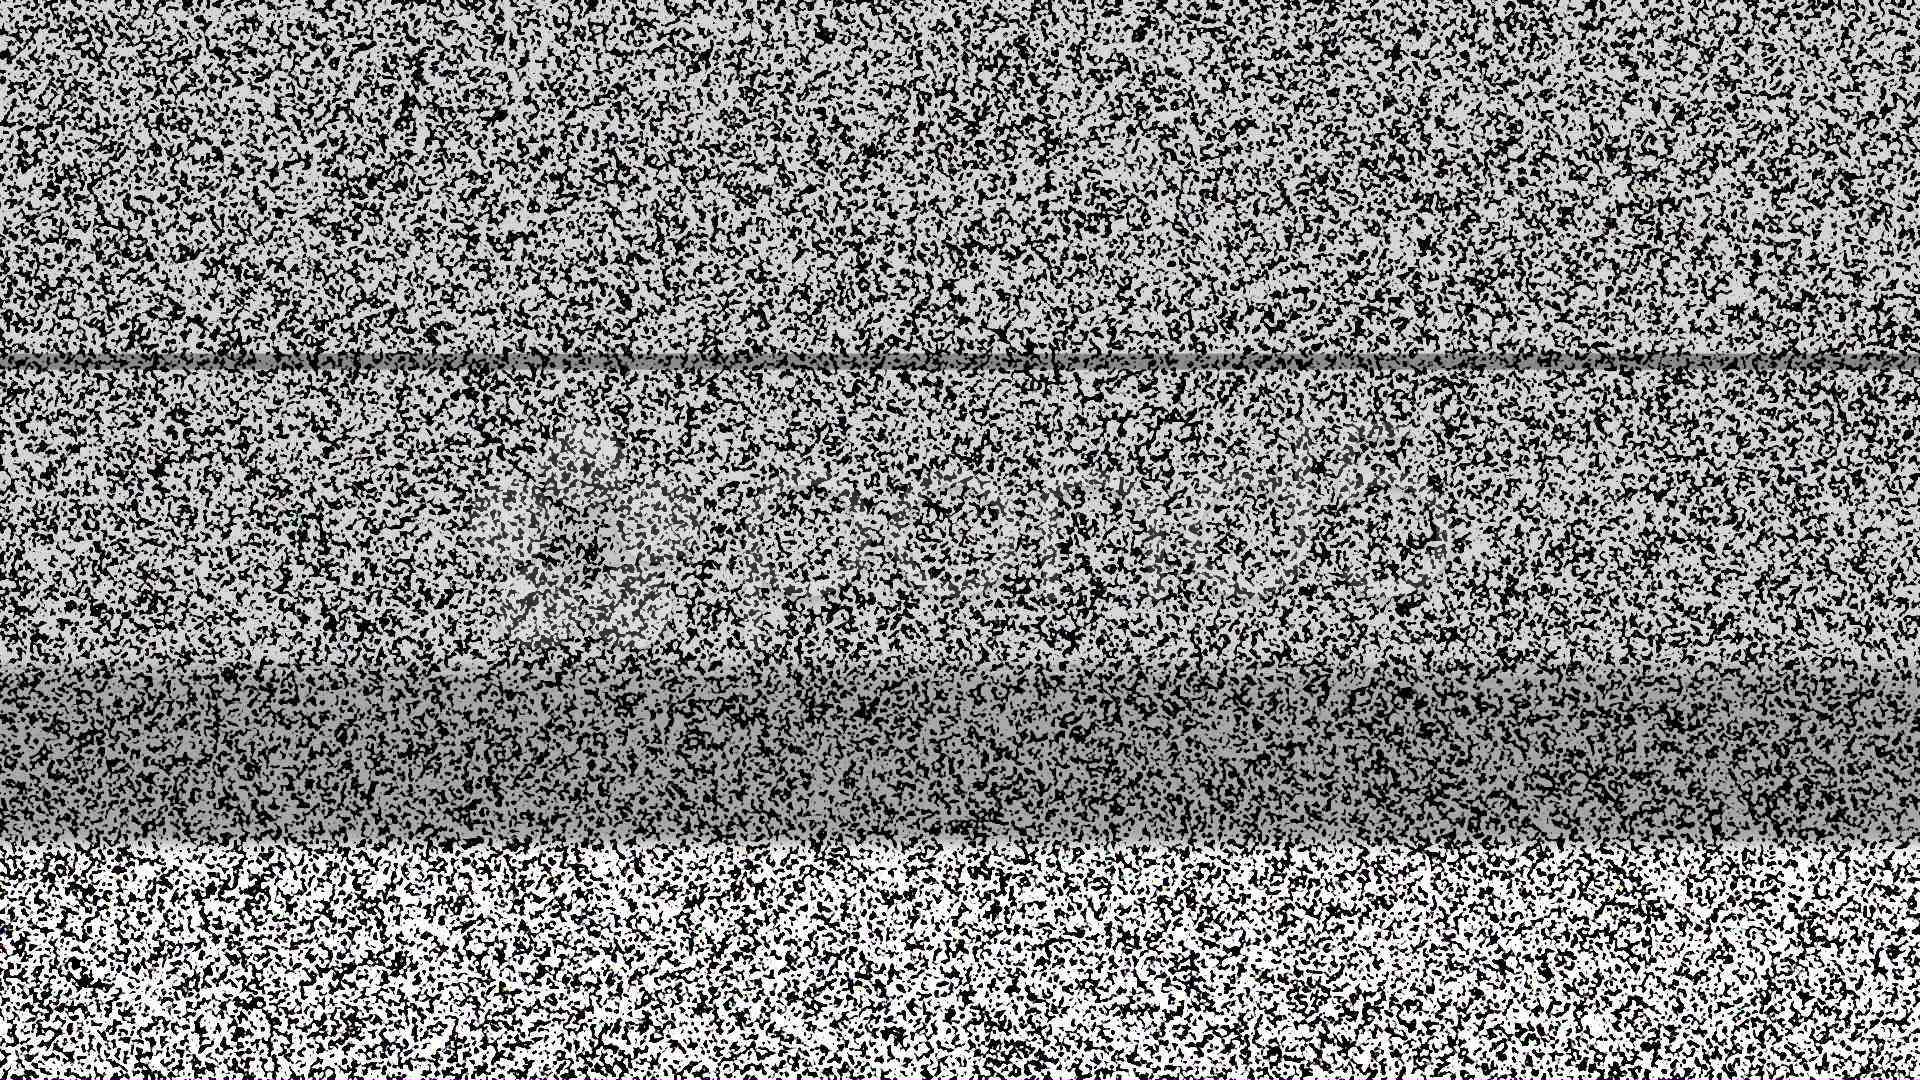 Colorful Tv Static Background Noise 1080p With